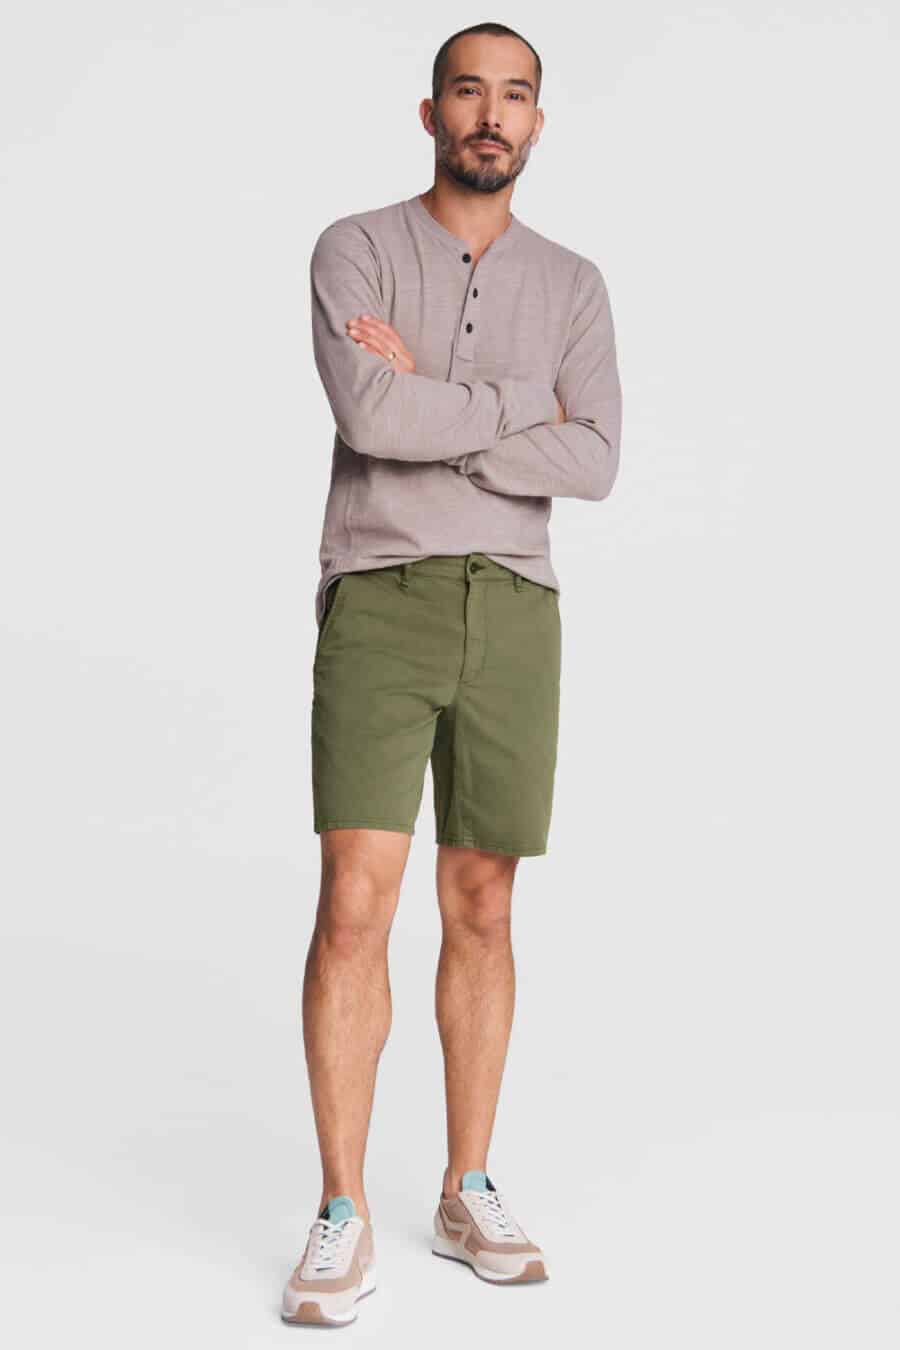 Men's green shorts, henley top and canvas sneakers outfit